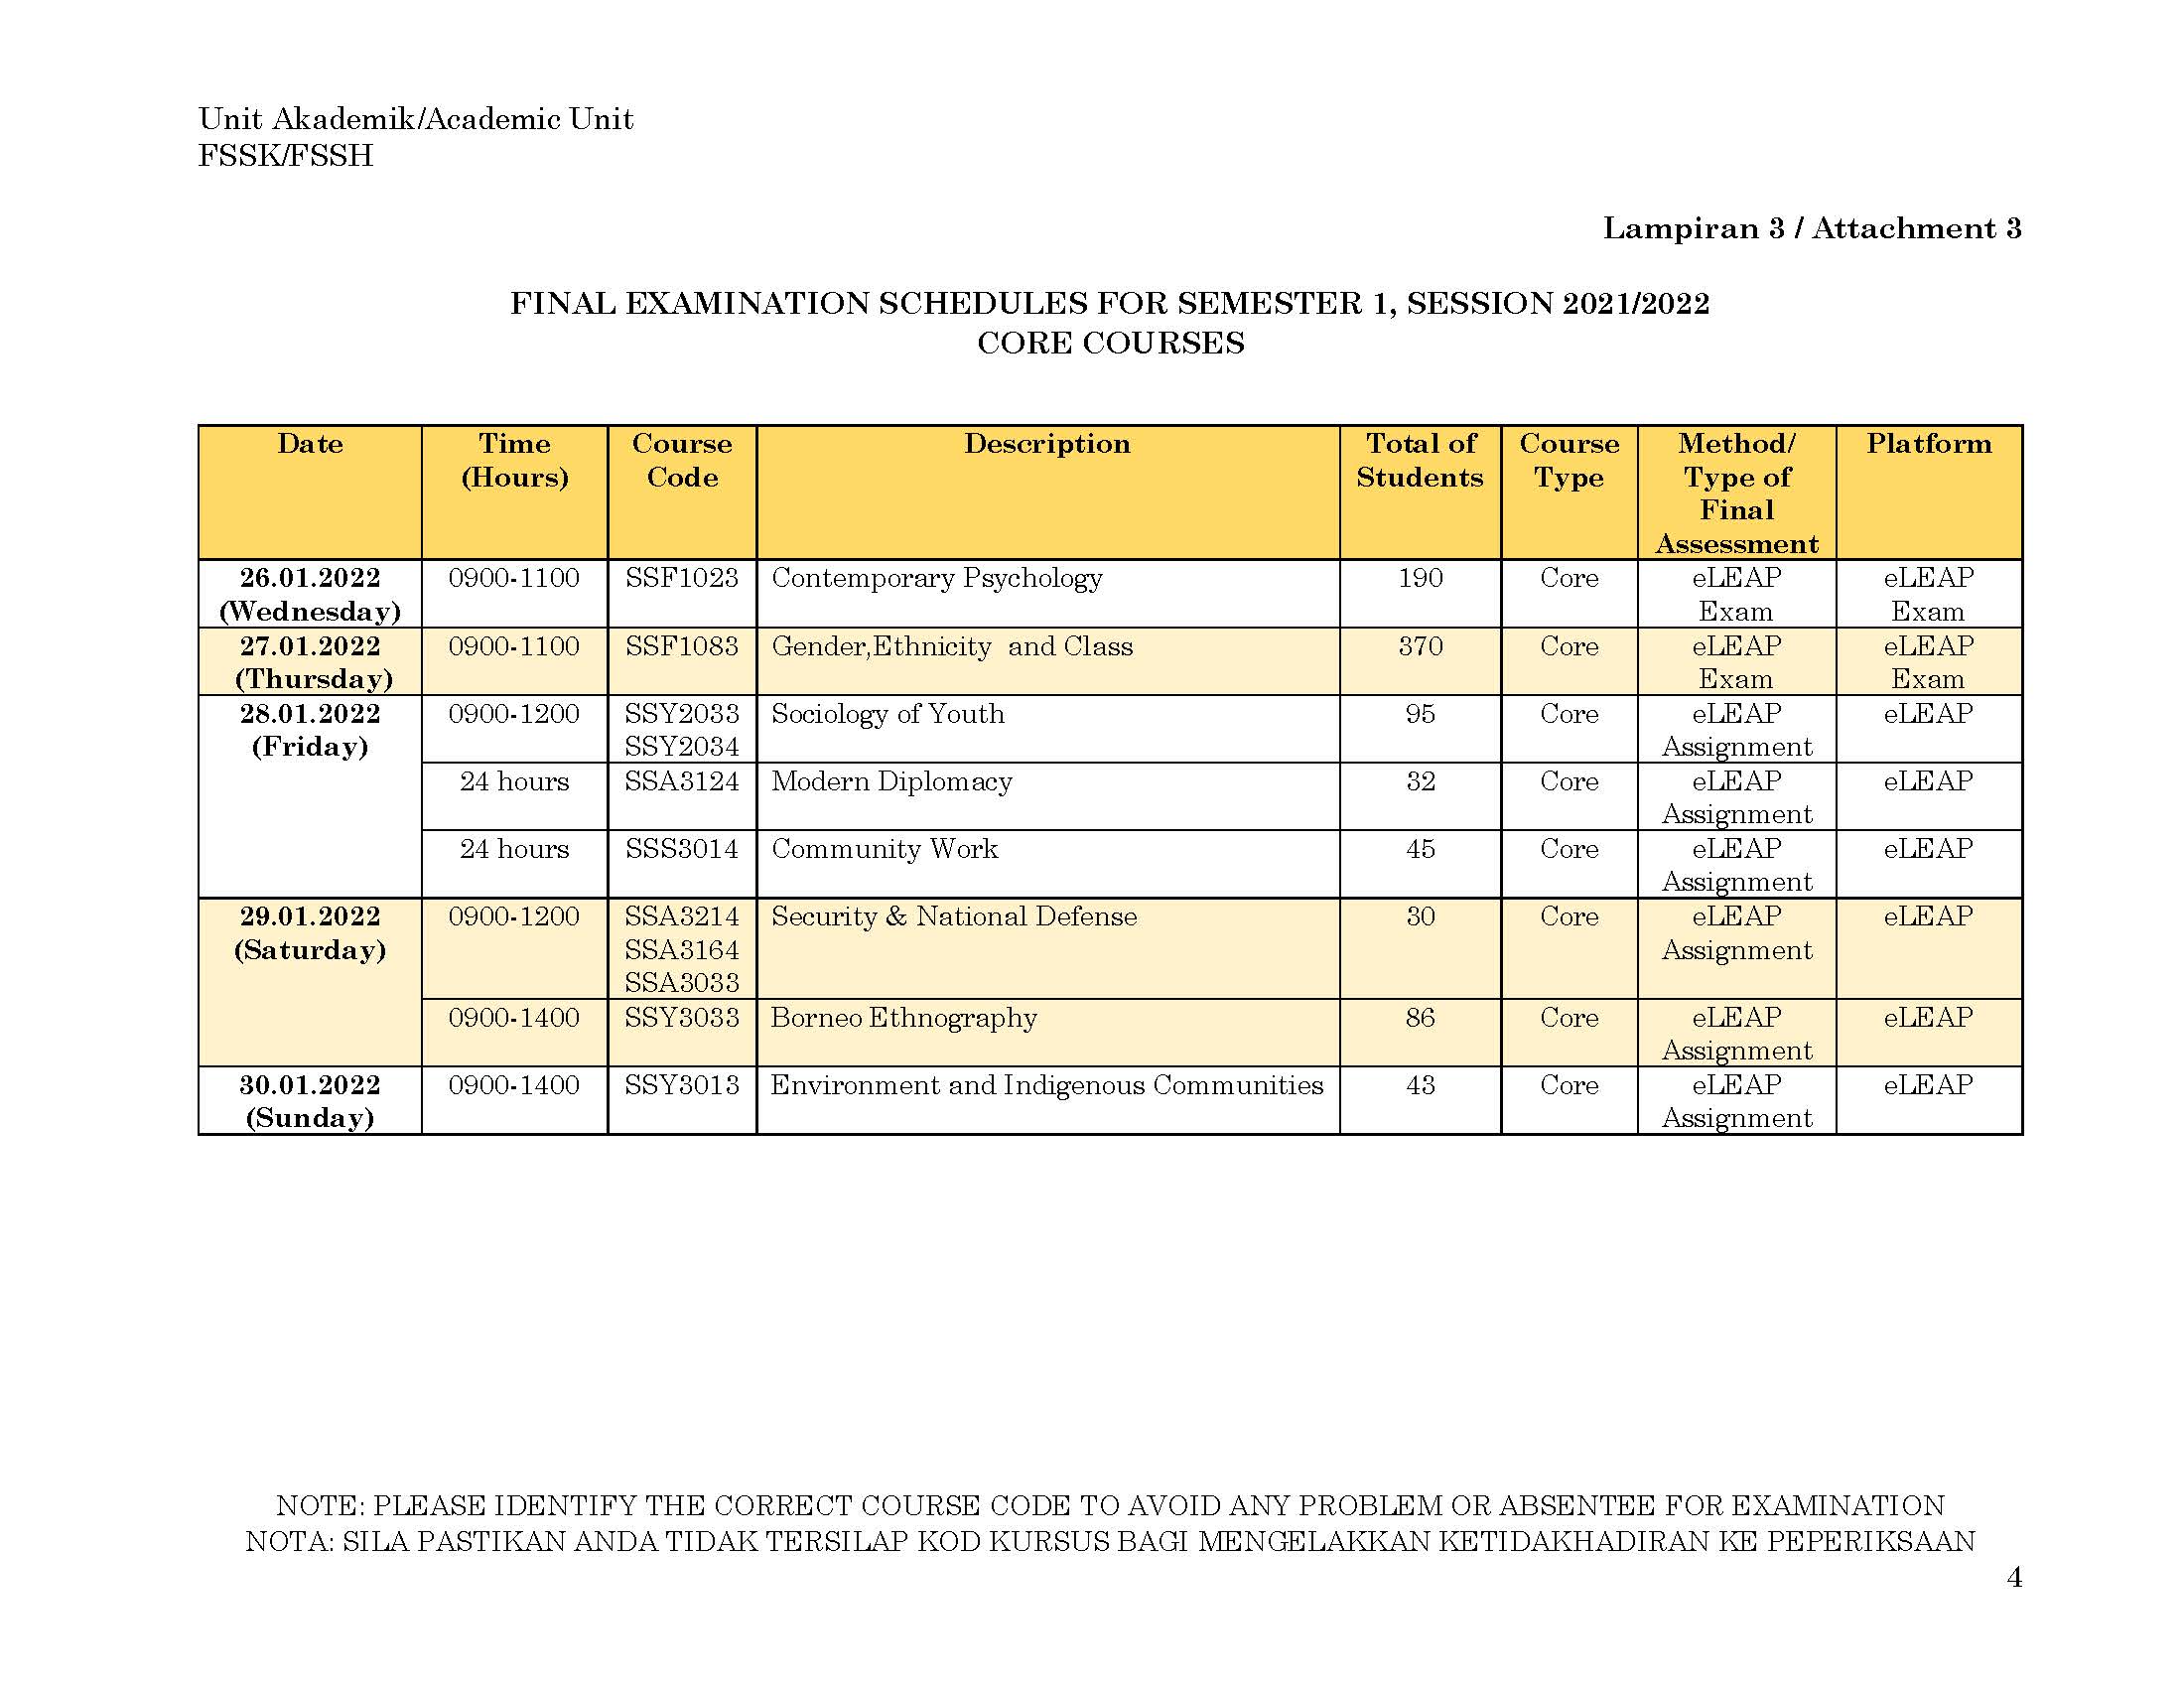 Page 5 UPDATE FINAL EXAMINATION SCHEDULES FOR SEMESTER 1 SESSION 2021 2022 2